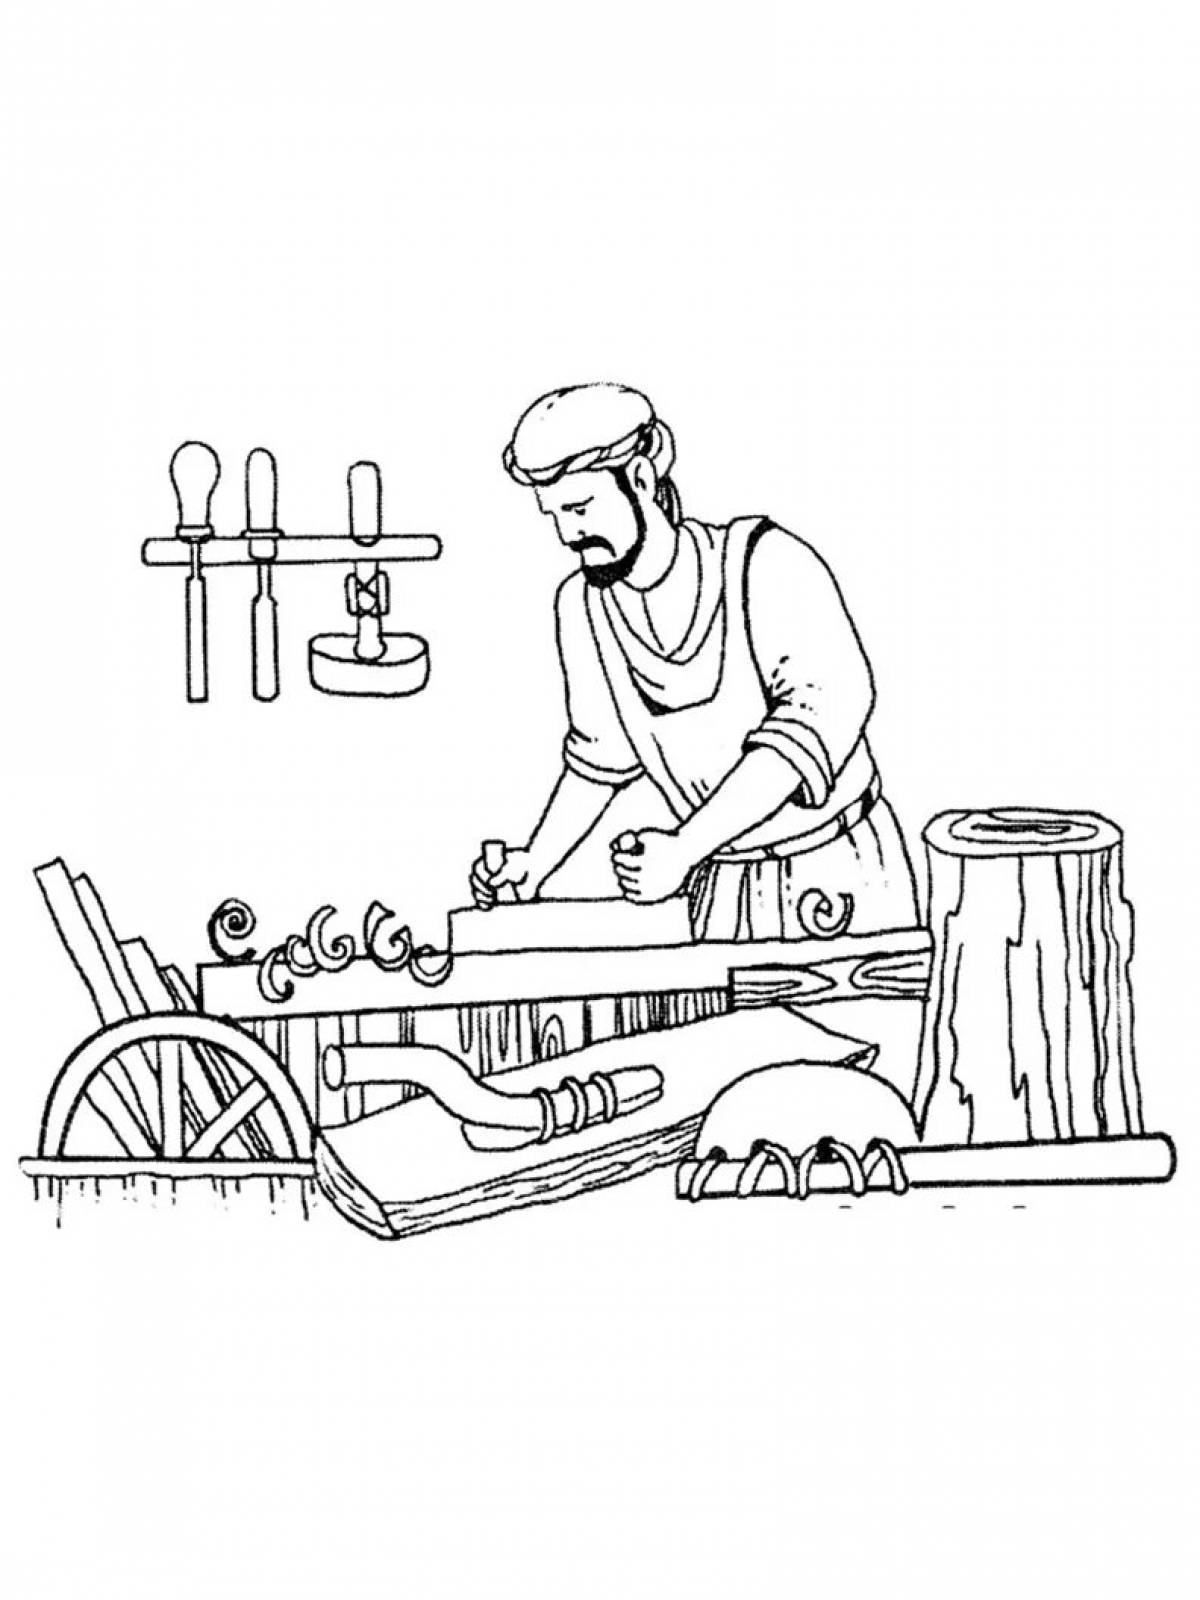 Glowing carpenter coloring page